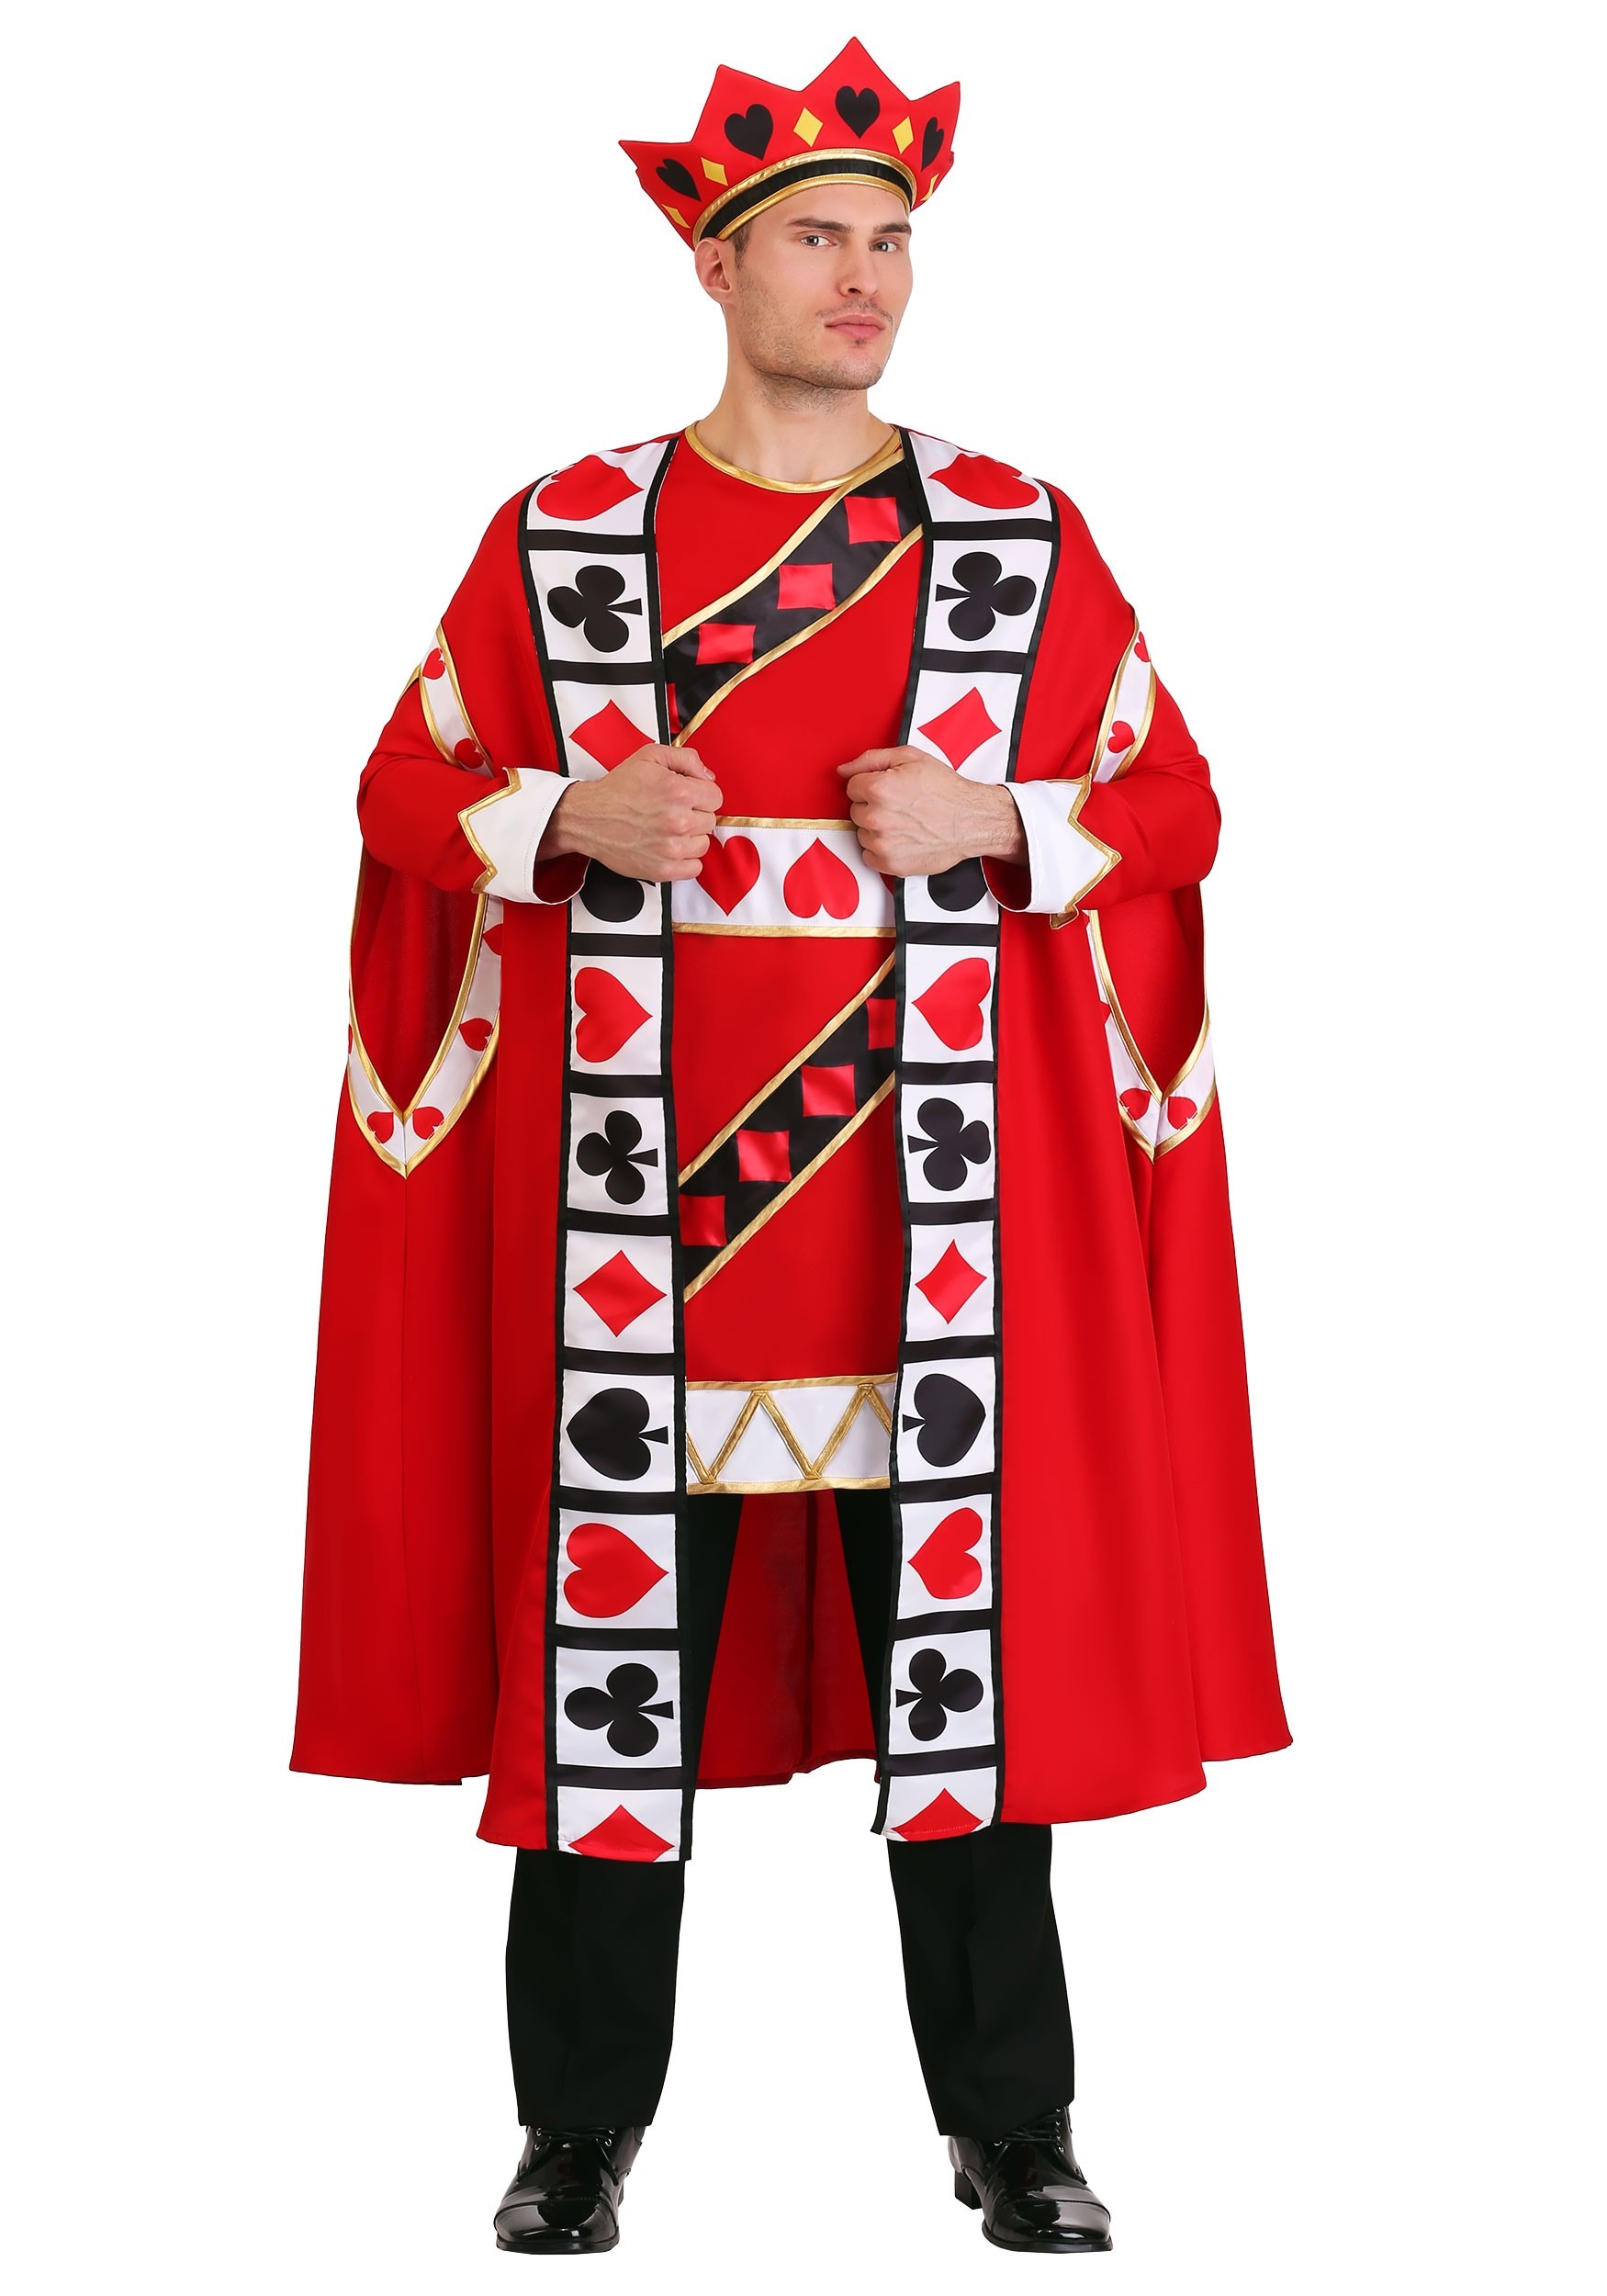 Image of King of Hearts Costume for Men ID FUN7135AD-S